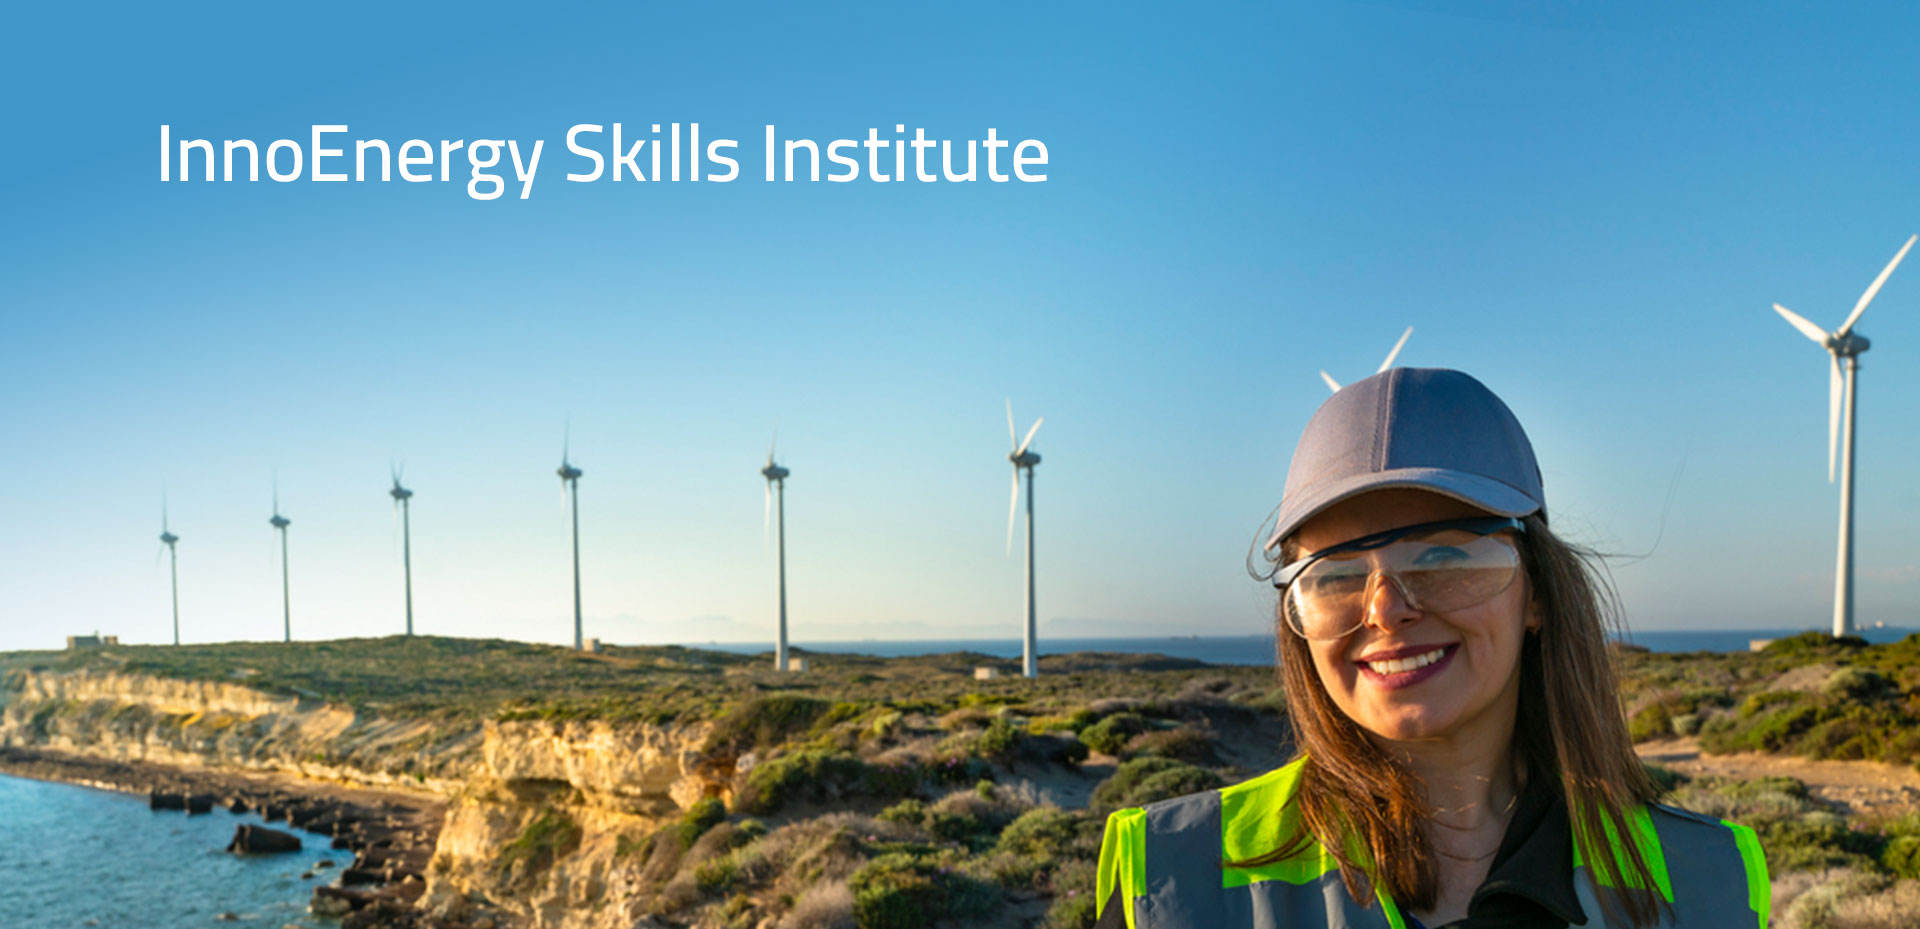 Transforming skills for a sustainable tomorrow